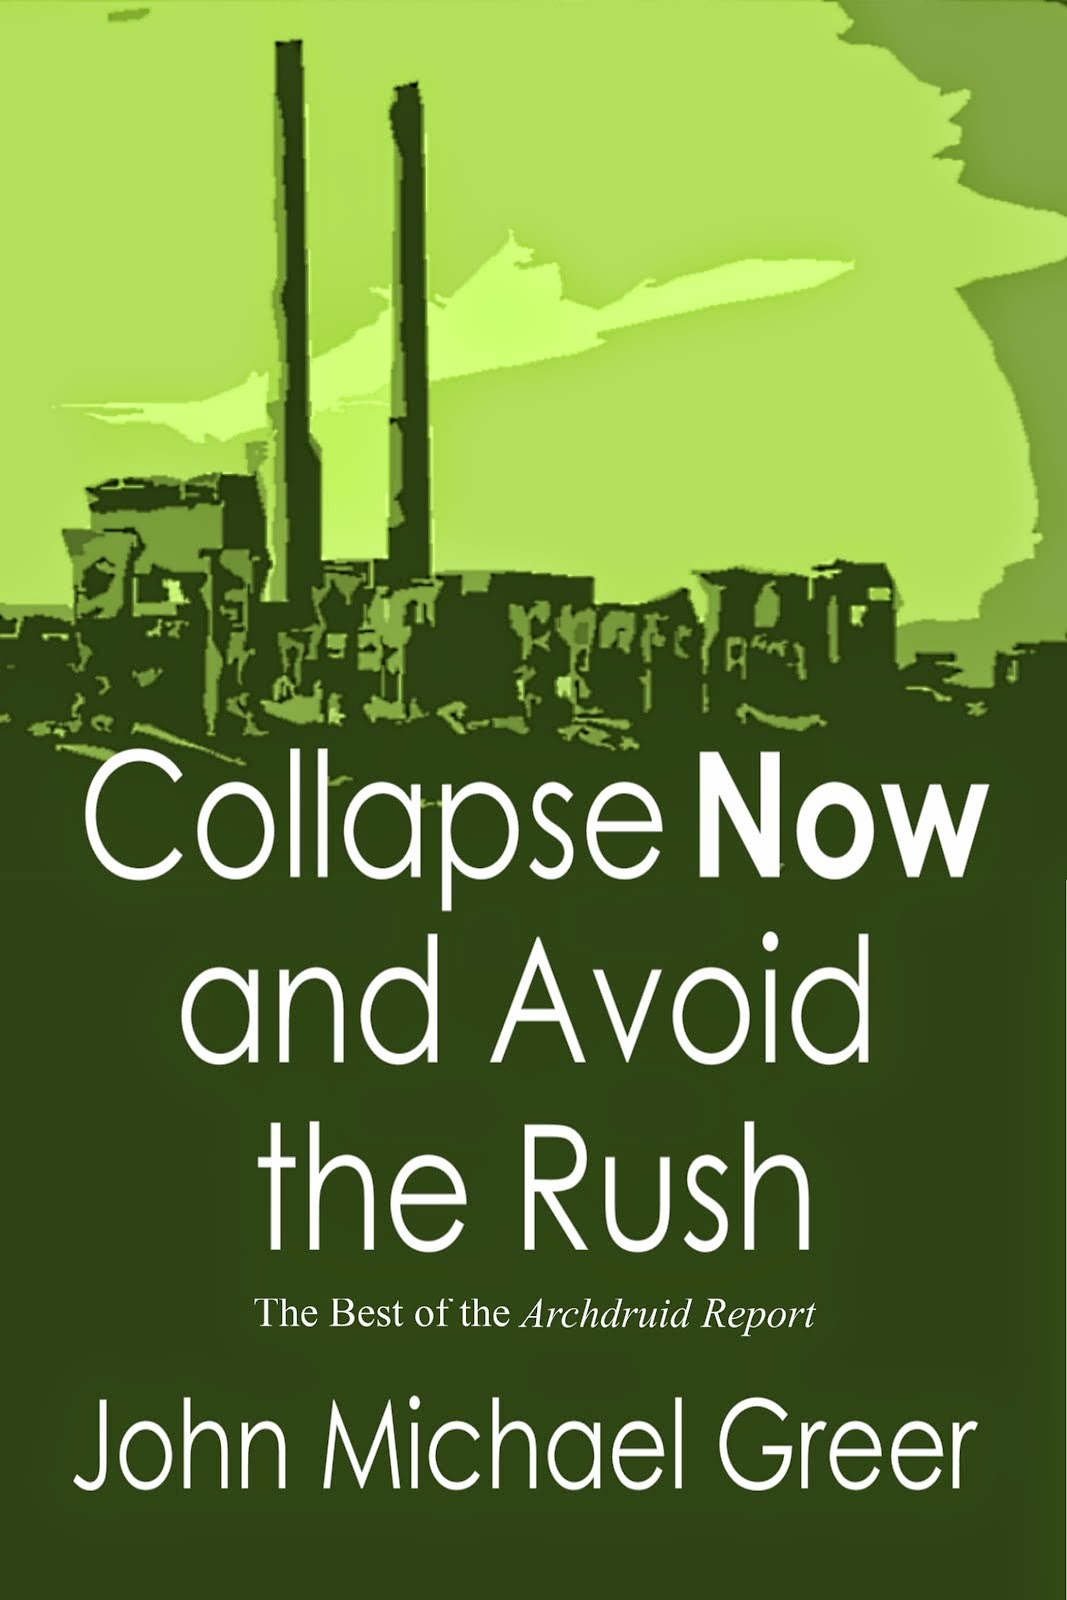 Collapse Now and Avoid the Rush